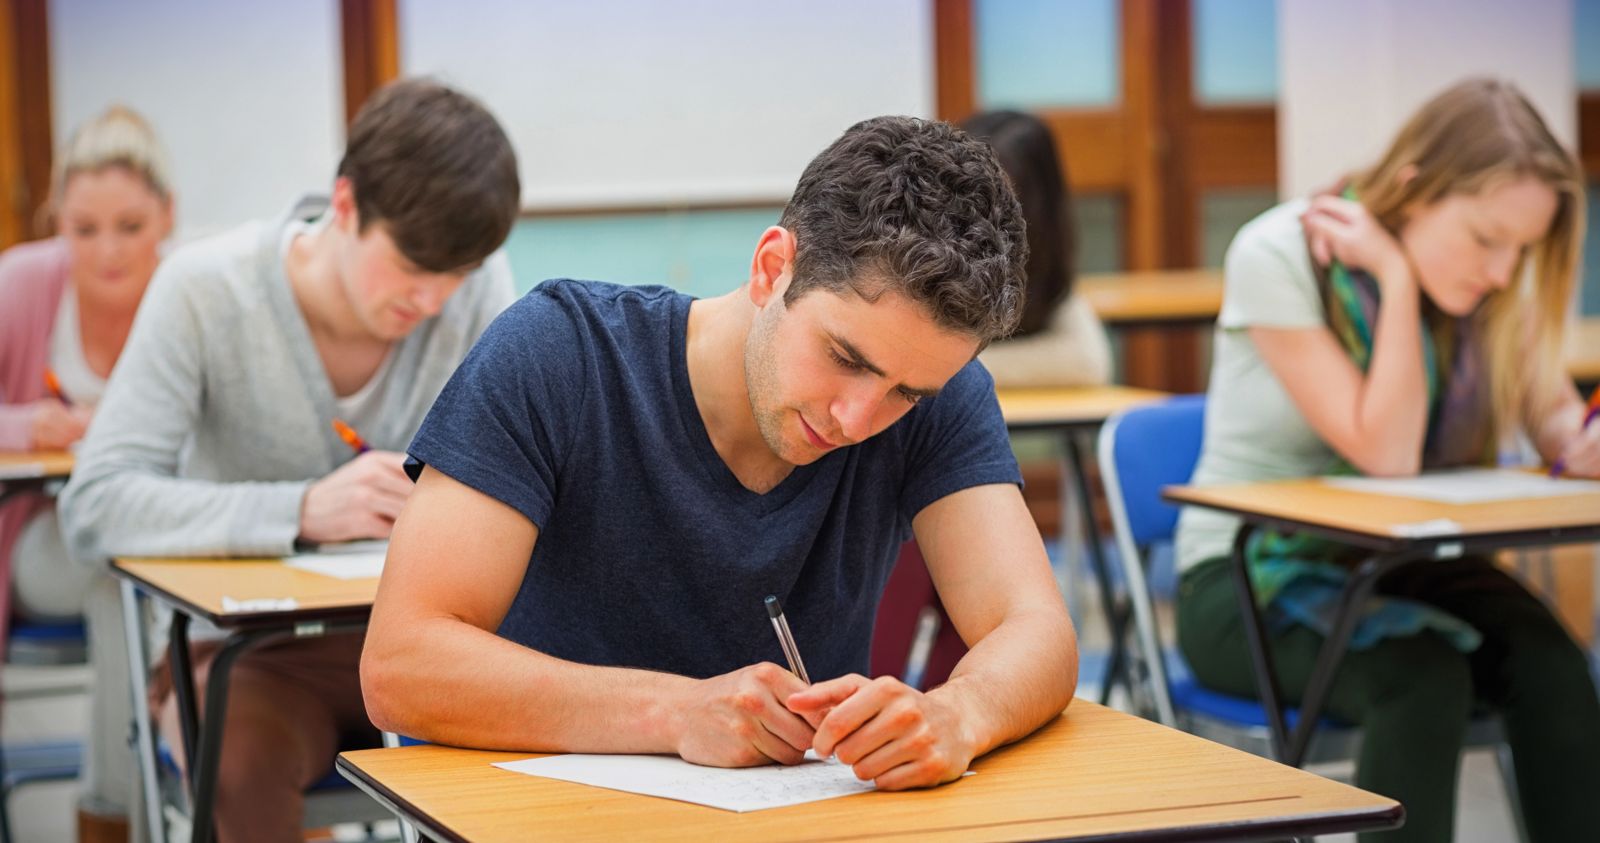 Two male and two female Caucasian students wearing casual clothing sit at desks in a classroom while writing on paper like they are taking a test.